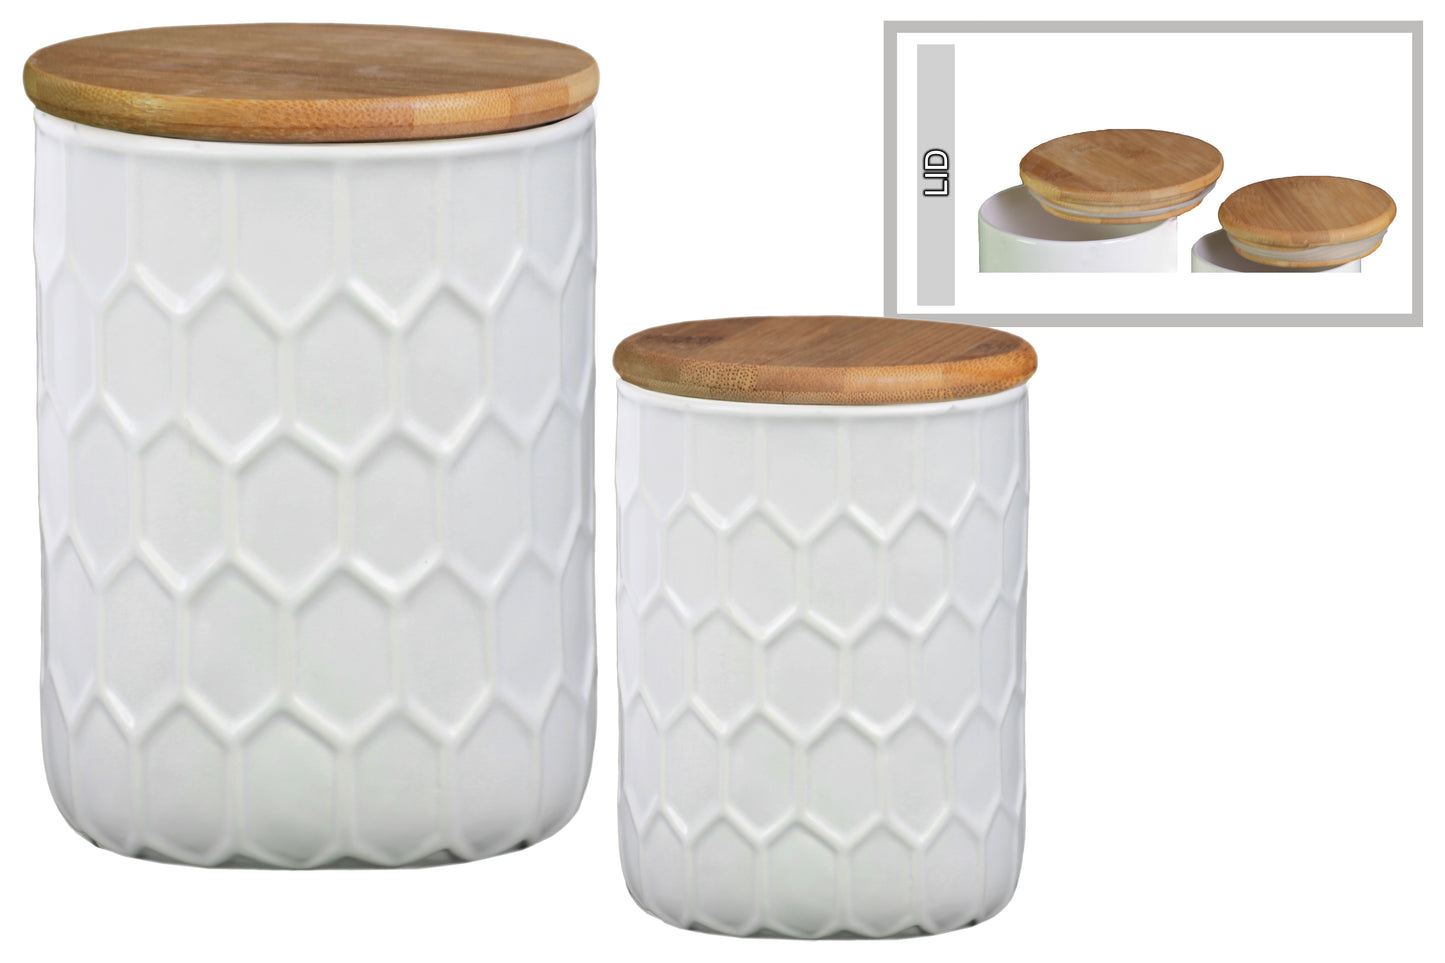 Ceramic Round Canister with Bamboo Lid and Engraved Honeycomb Design Body, Set of 2